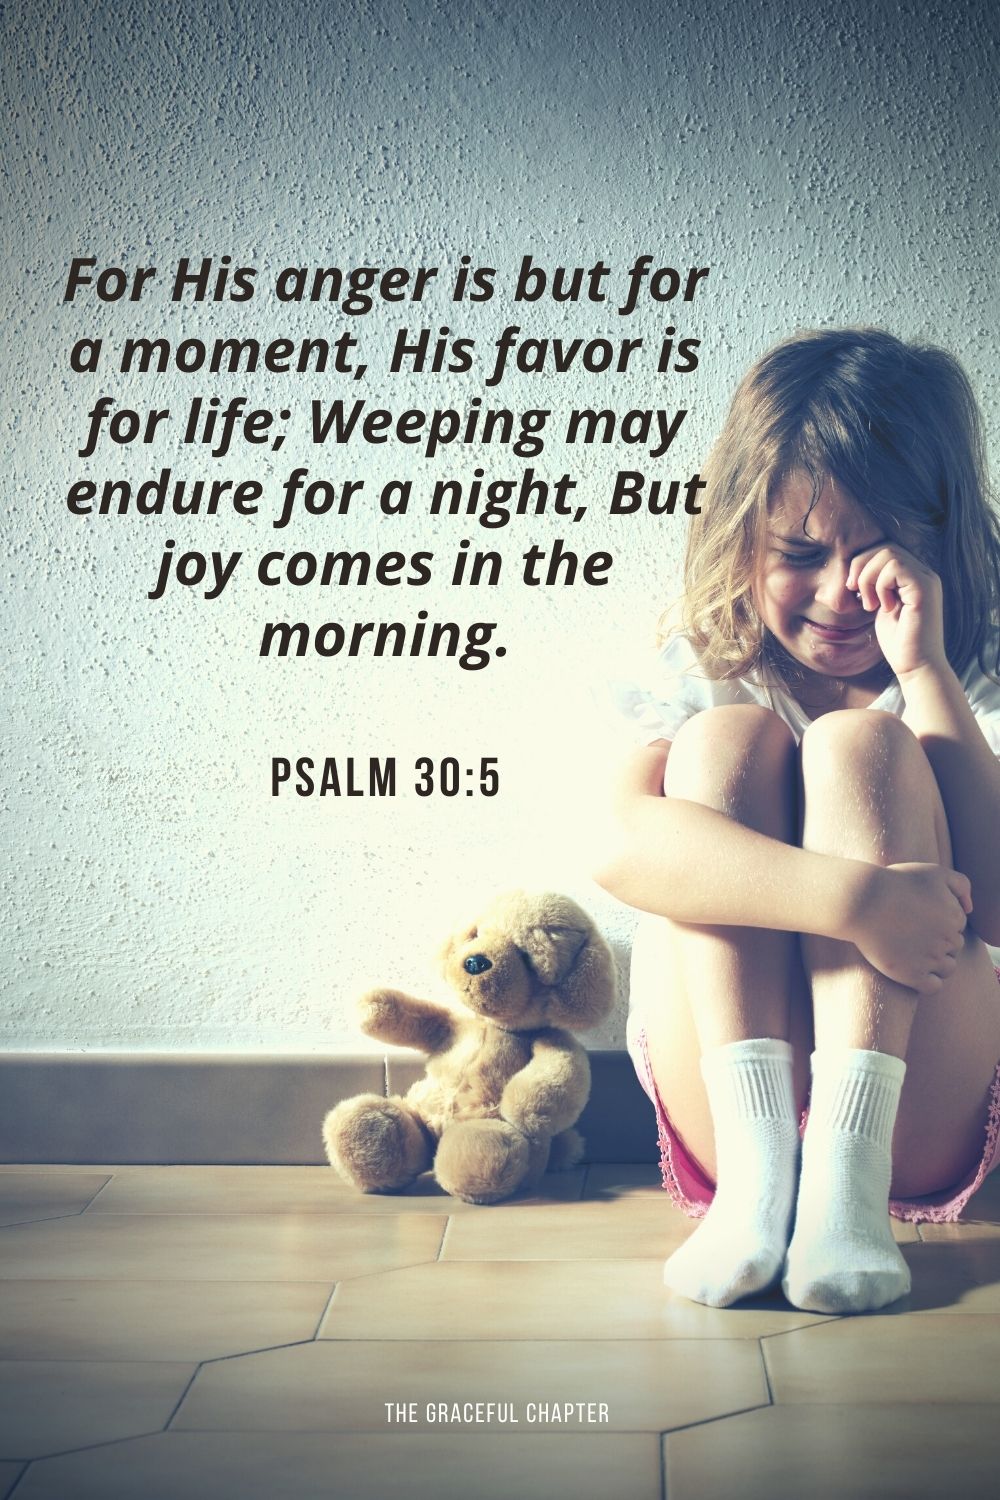 For His anger is but for a moment, His favor is for life; Weeping may endure for a night, But joy comes in the morning. Psalm 30:5